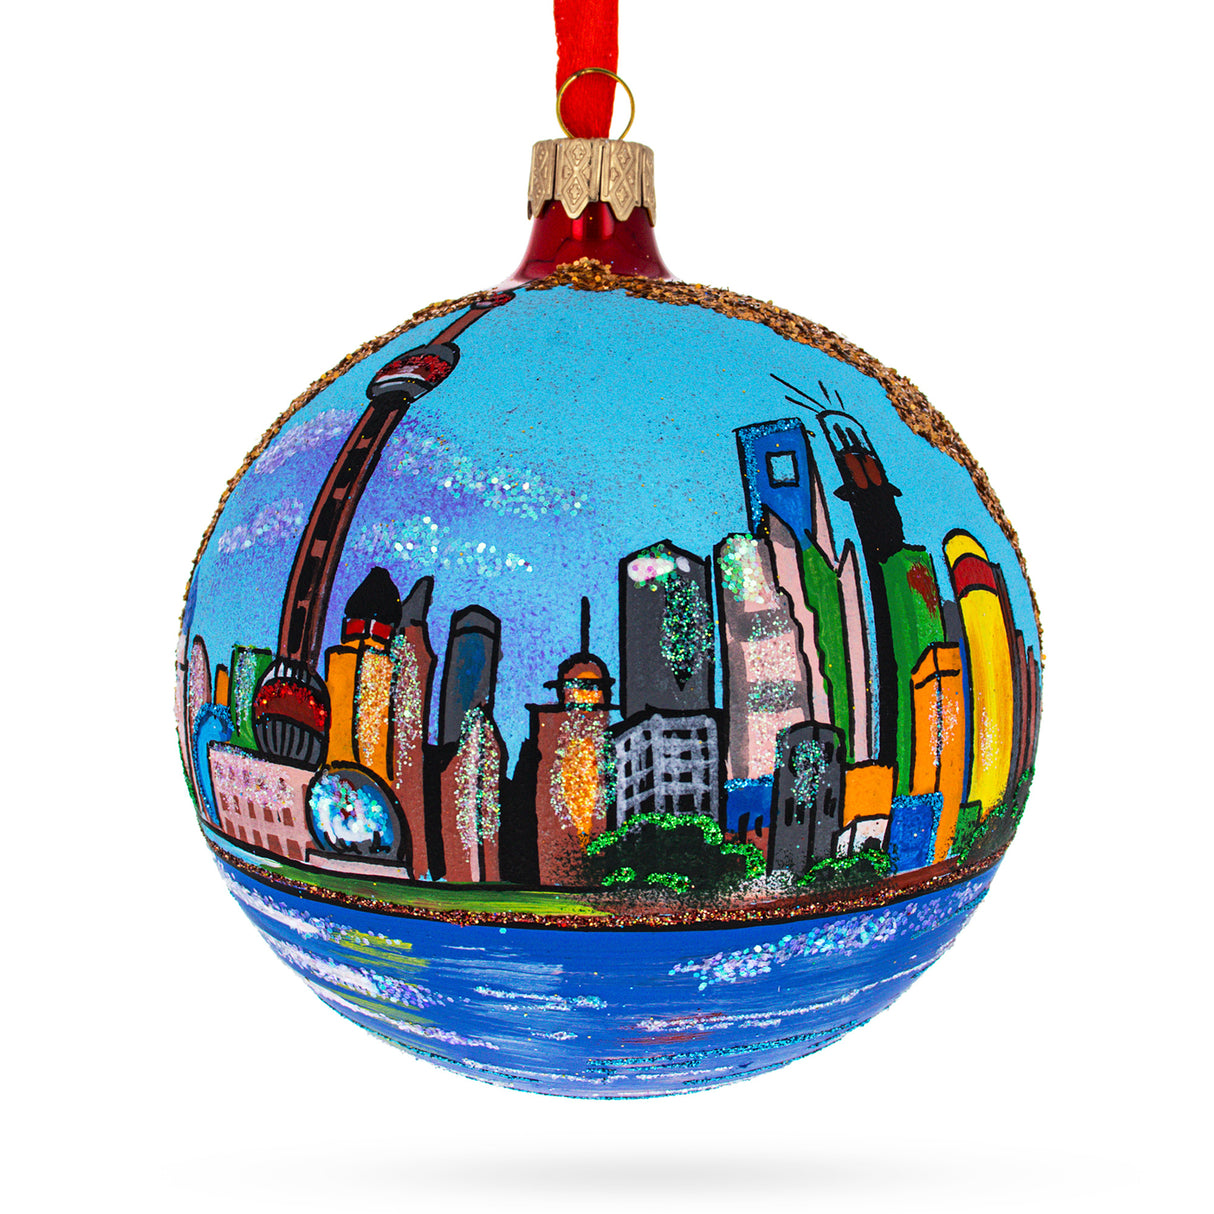 Glass The Bund (Wai Tan), Shanghai, China Glass Ball Christmas Ornament 4 Inches in Multi color Round